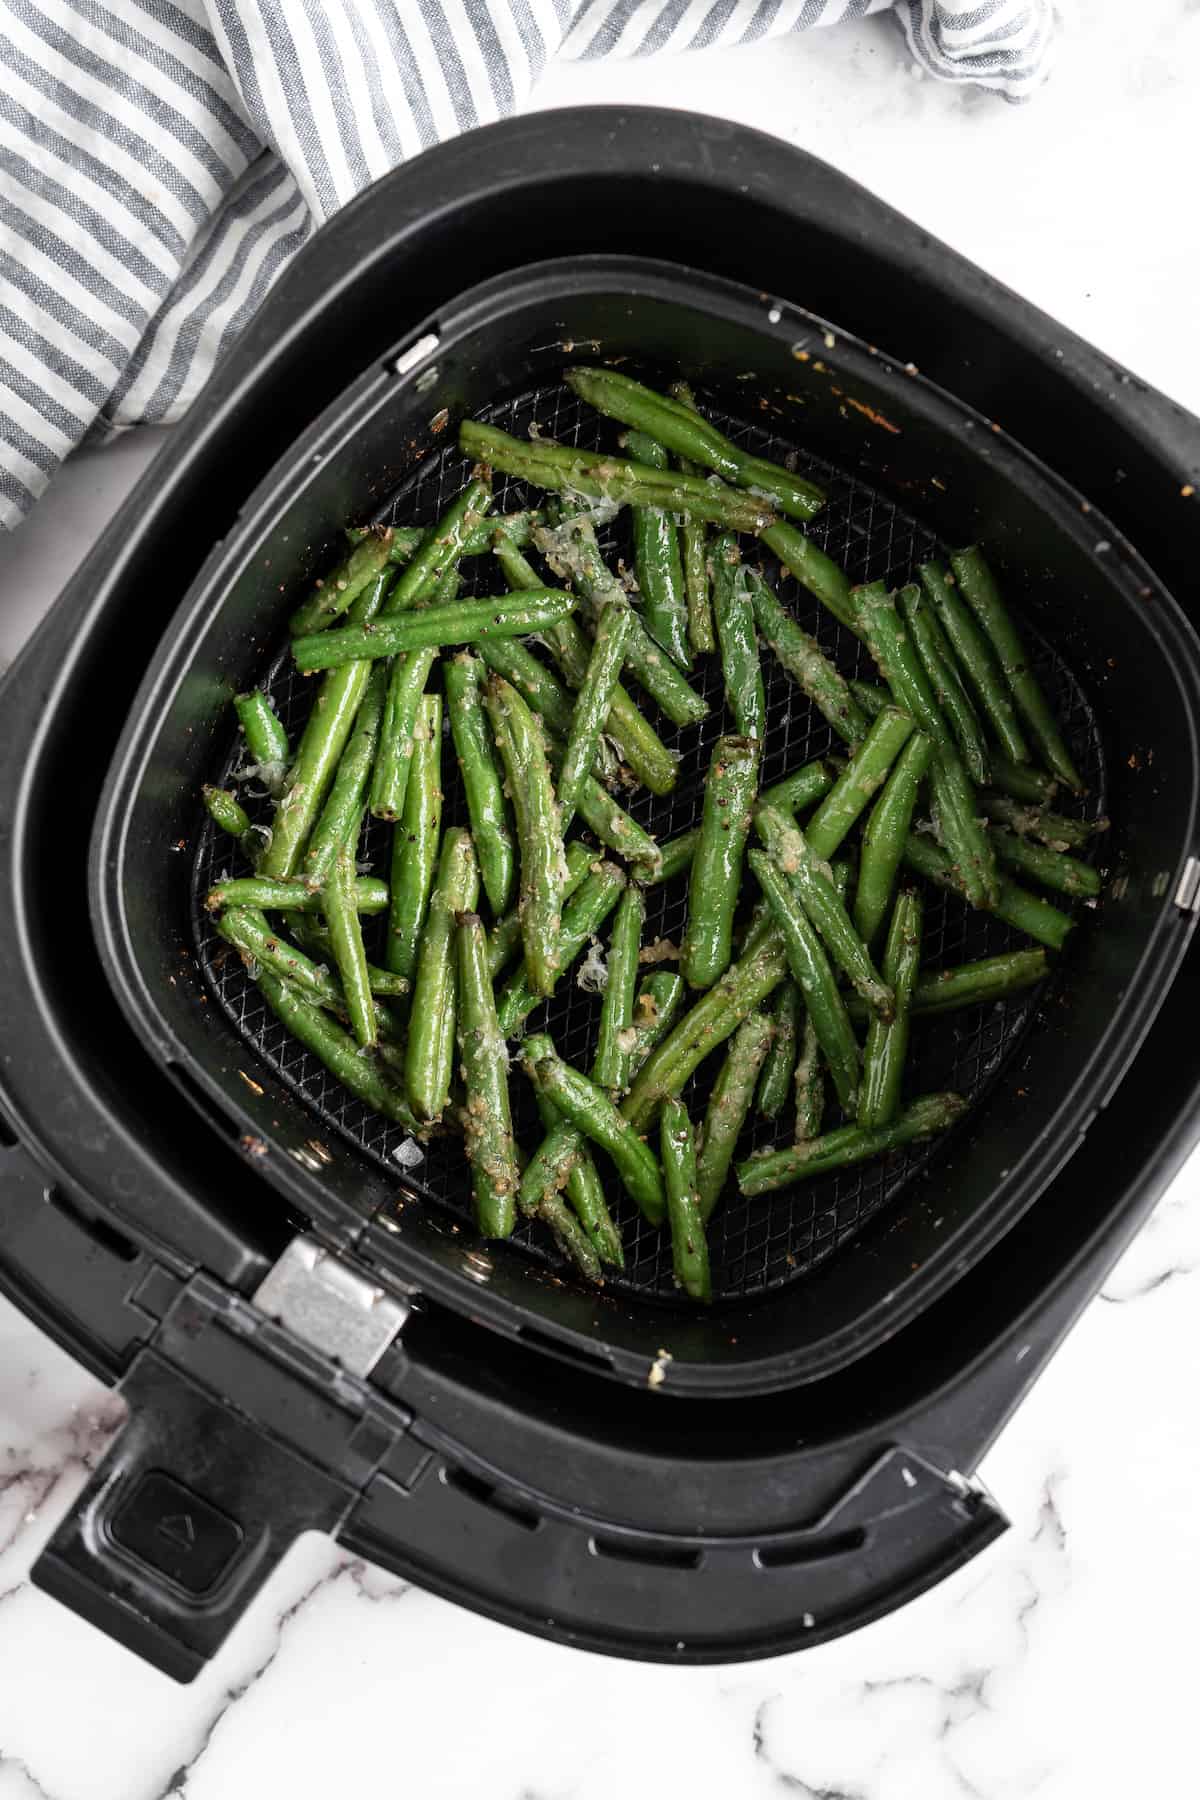 Cooked green beans in air fryer